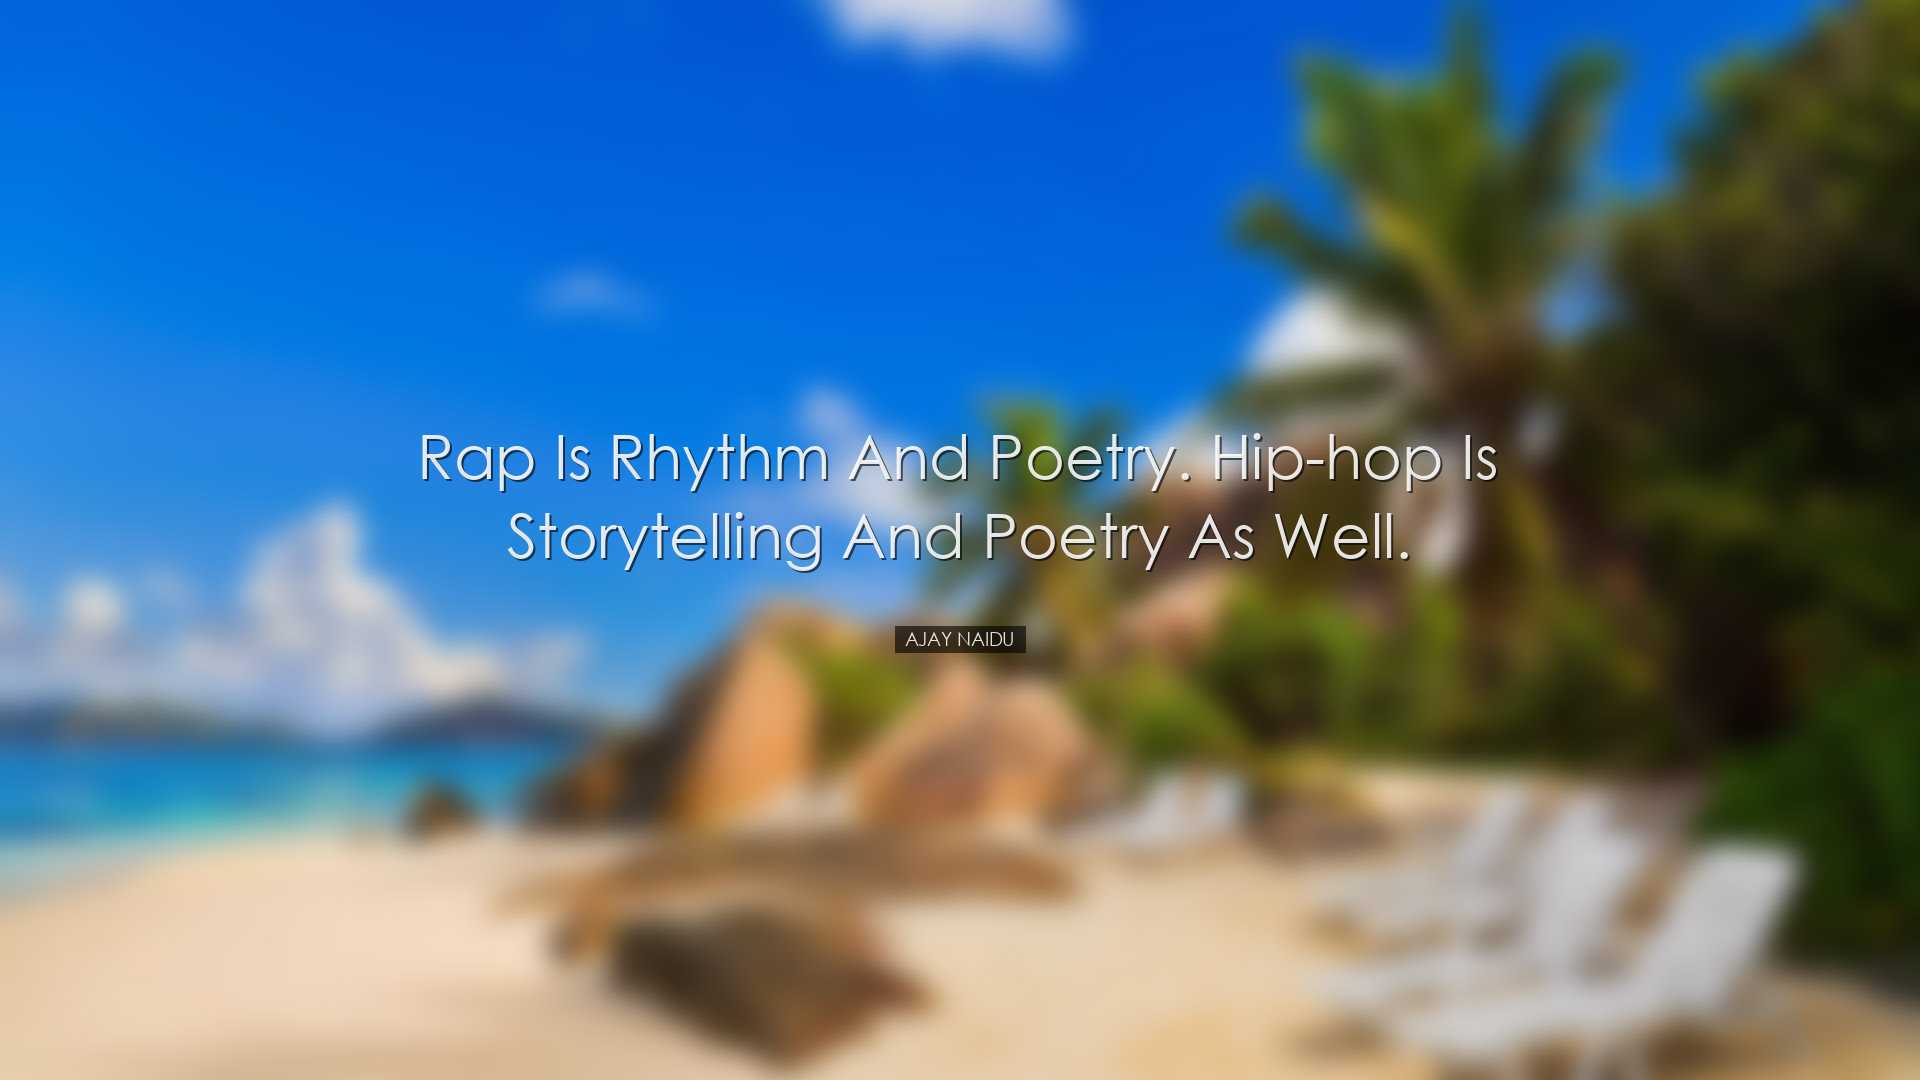 Rap is rhythm and poetry. Hip-hop is storytelling and poetry as we